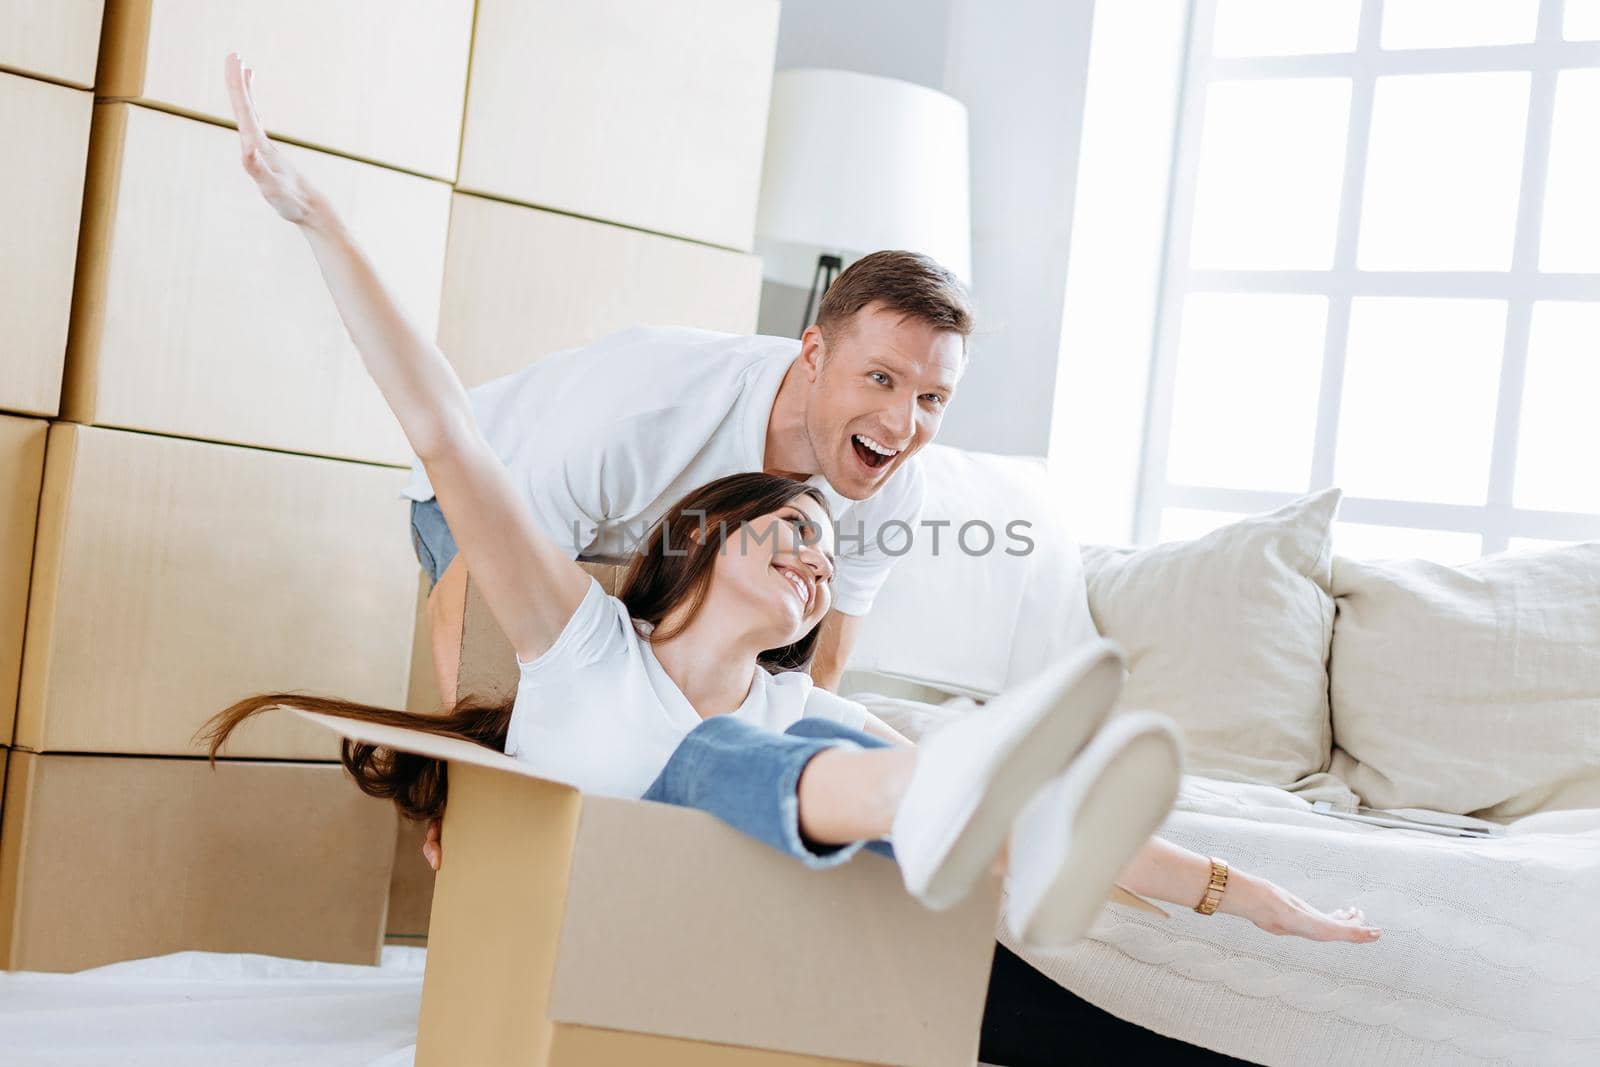 husband and wife have fun unpacking boxes in their new apartment by SmartPhotoLab